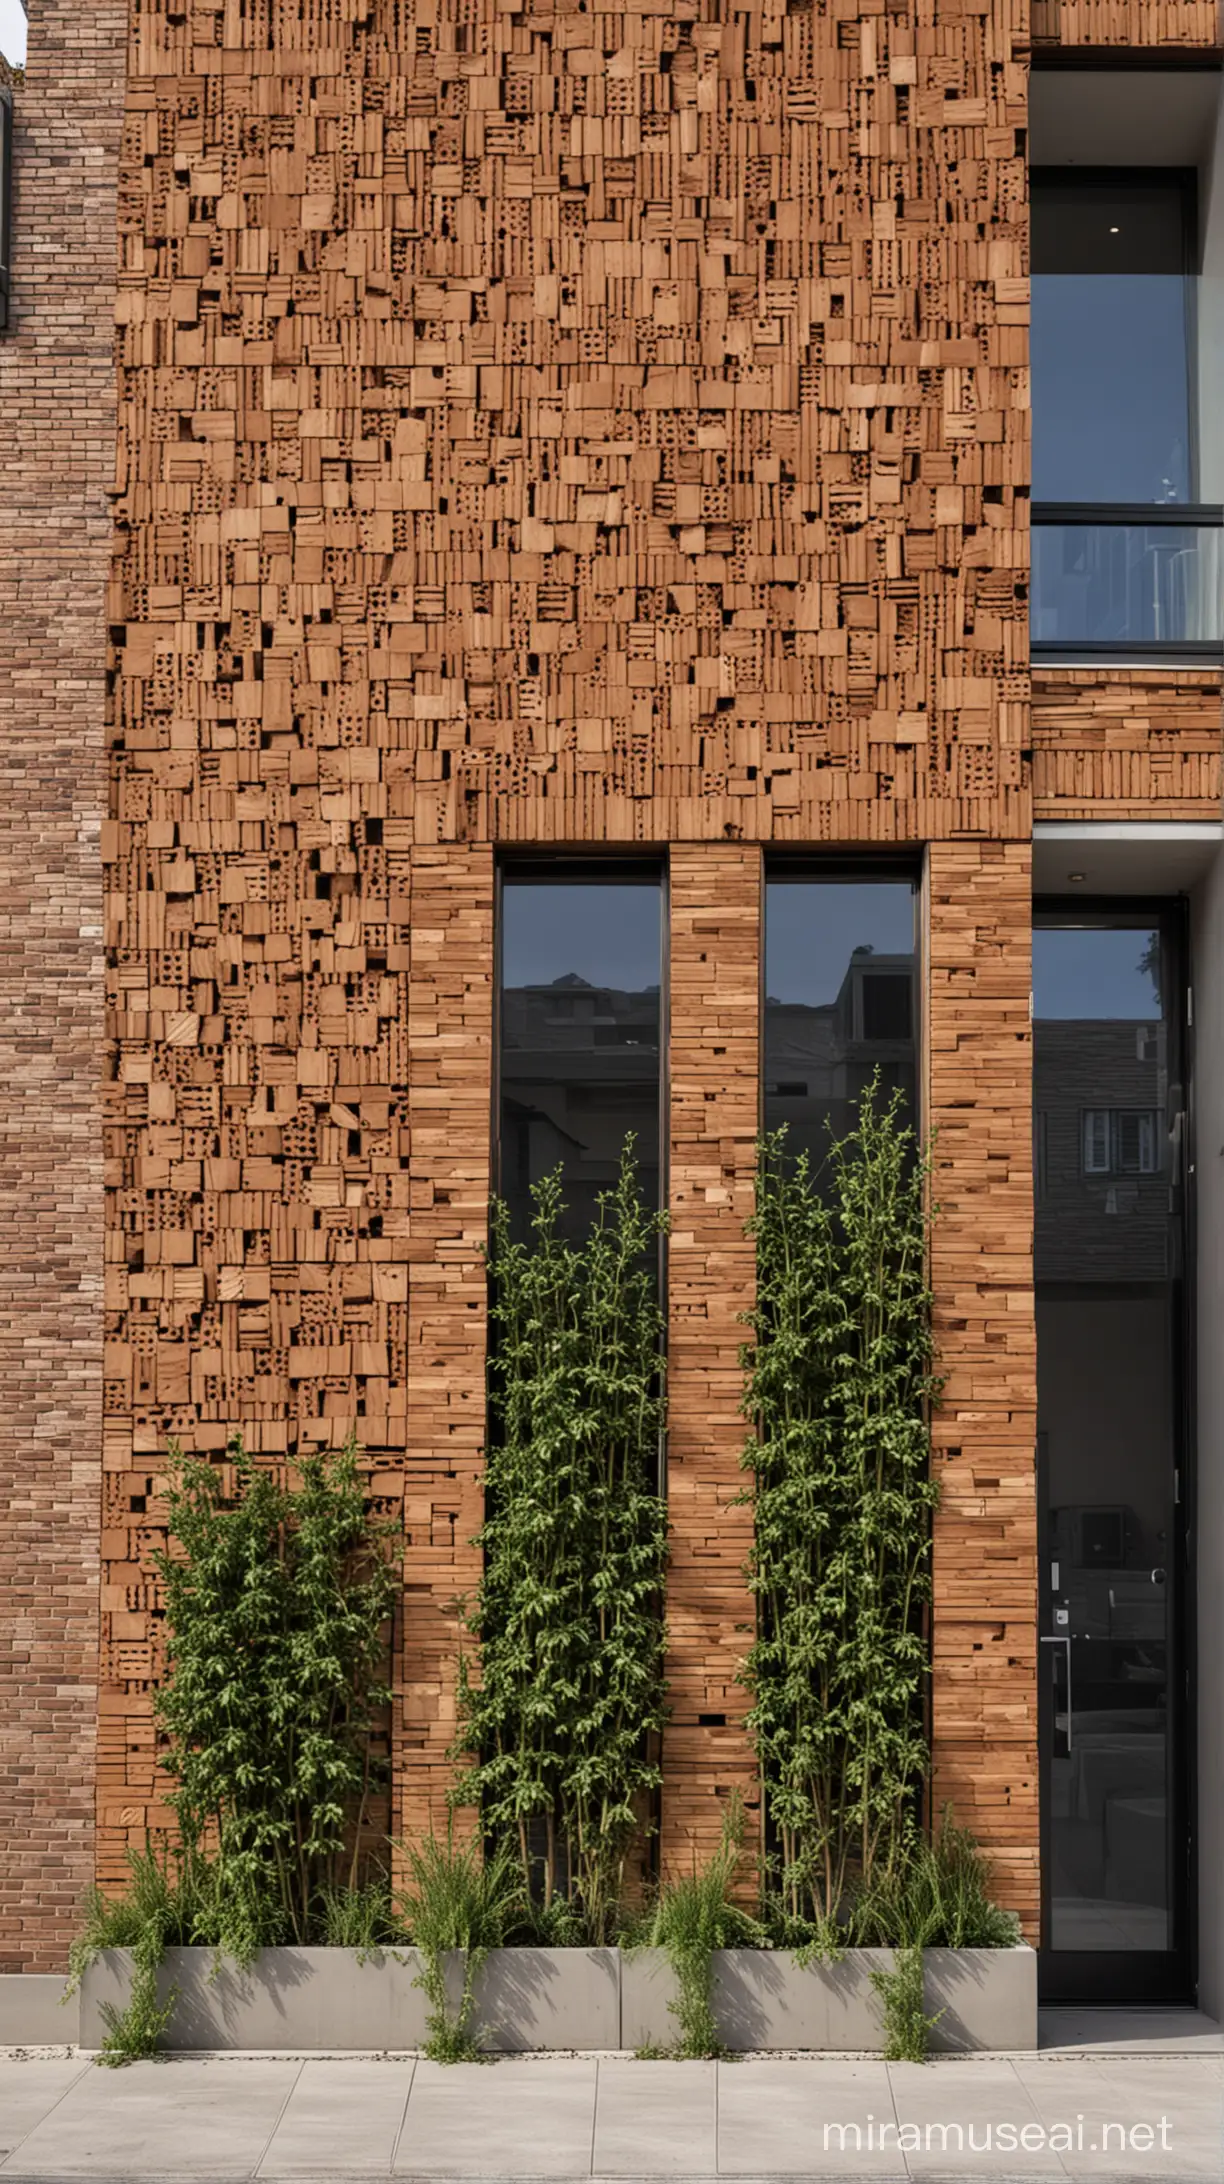 Facade design
Wood and brick
Concrete panel
KitKat style
Plant in facade 